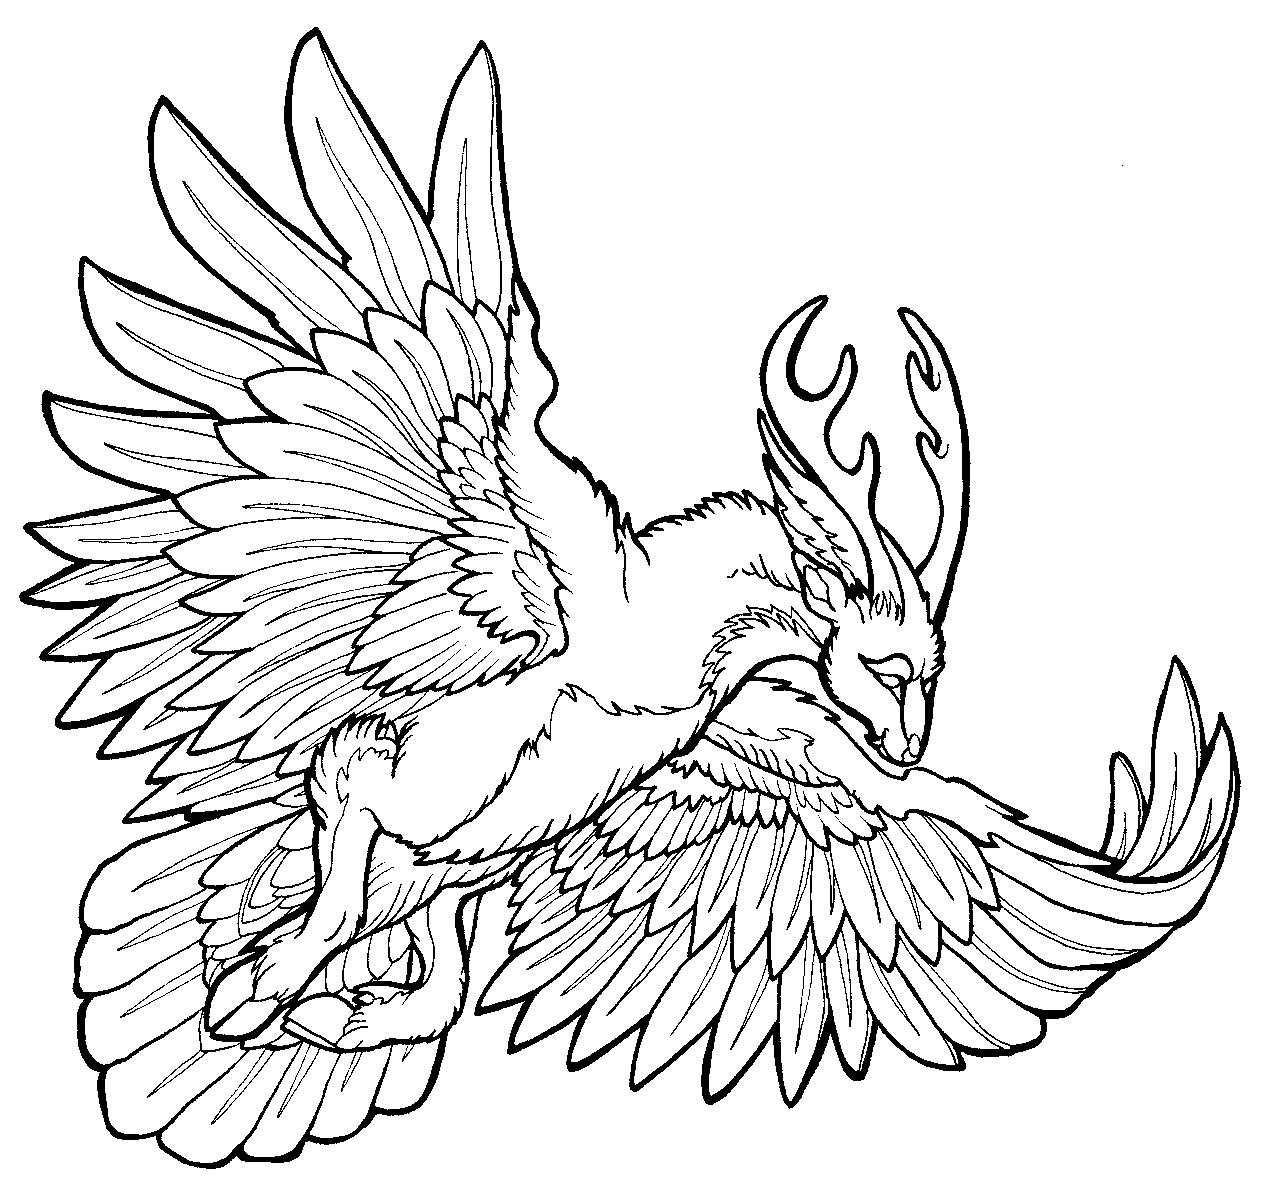 Griffin with horns